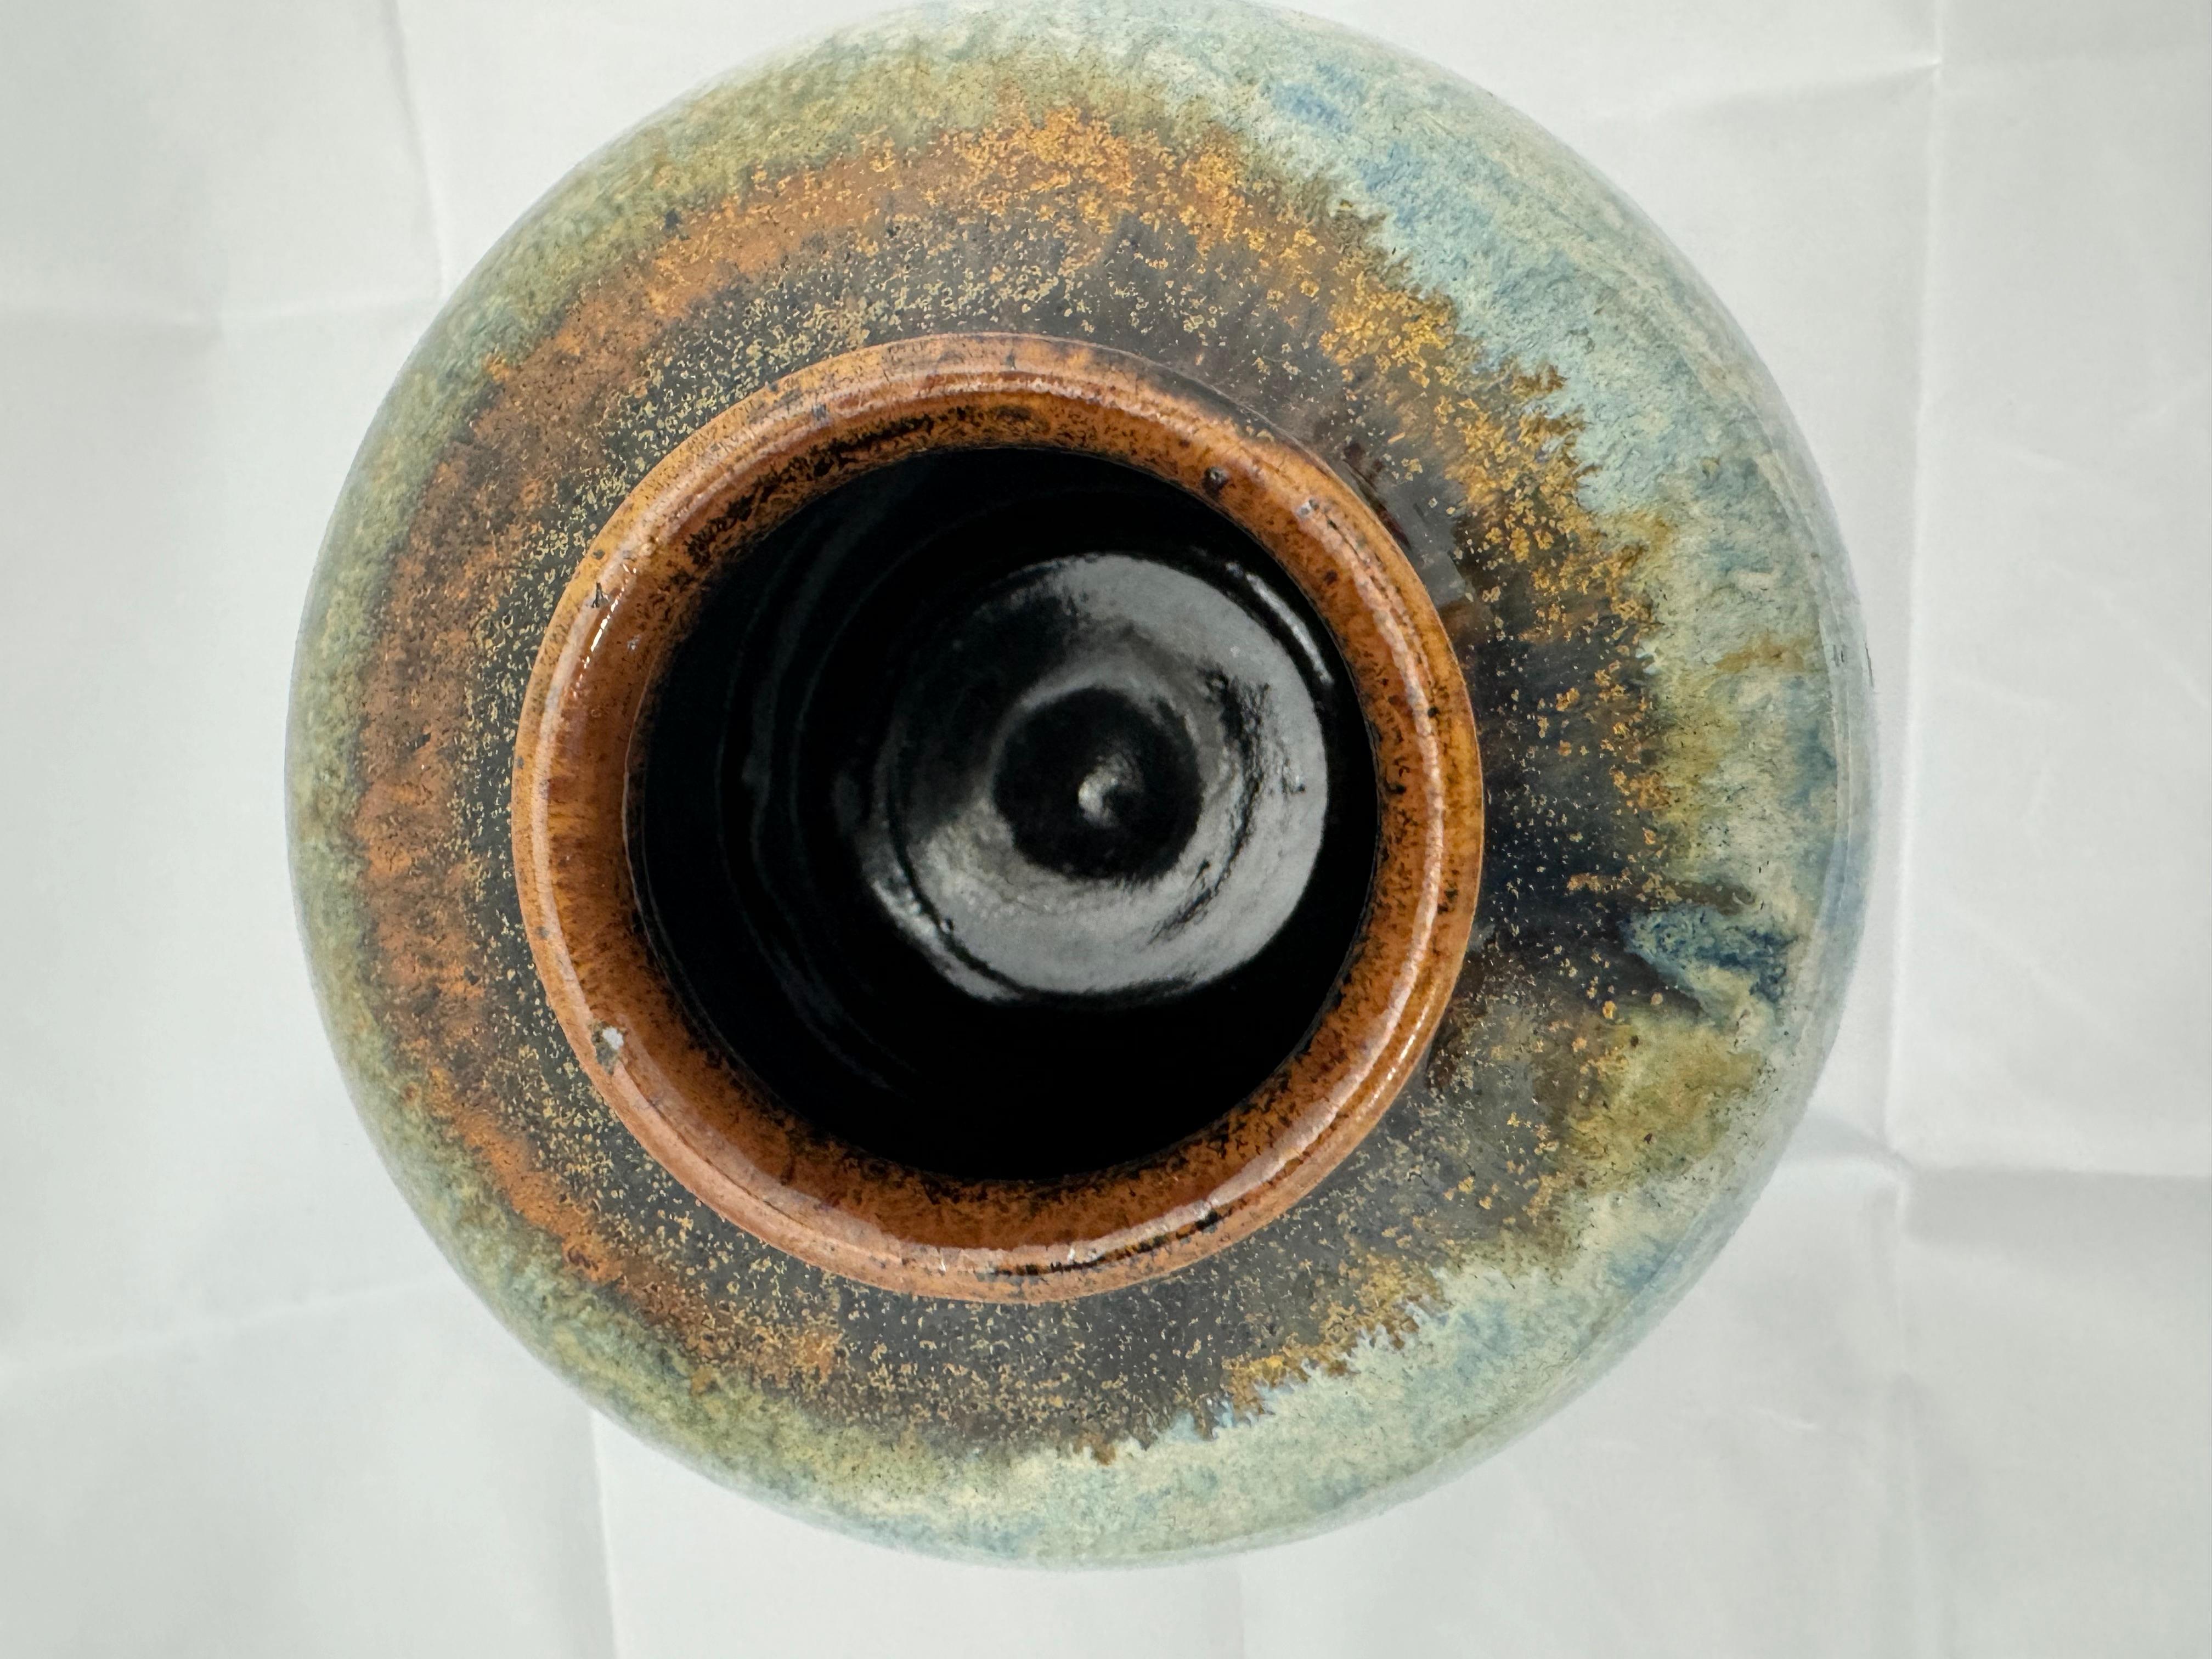 Nice heavily glazed pottery vase for your collection